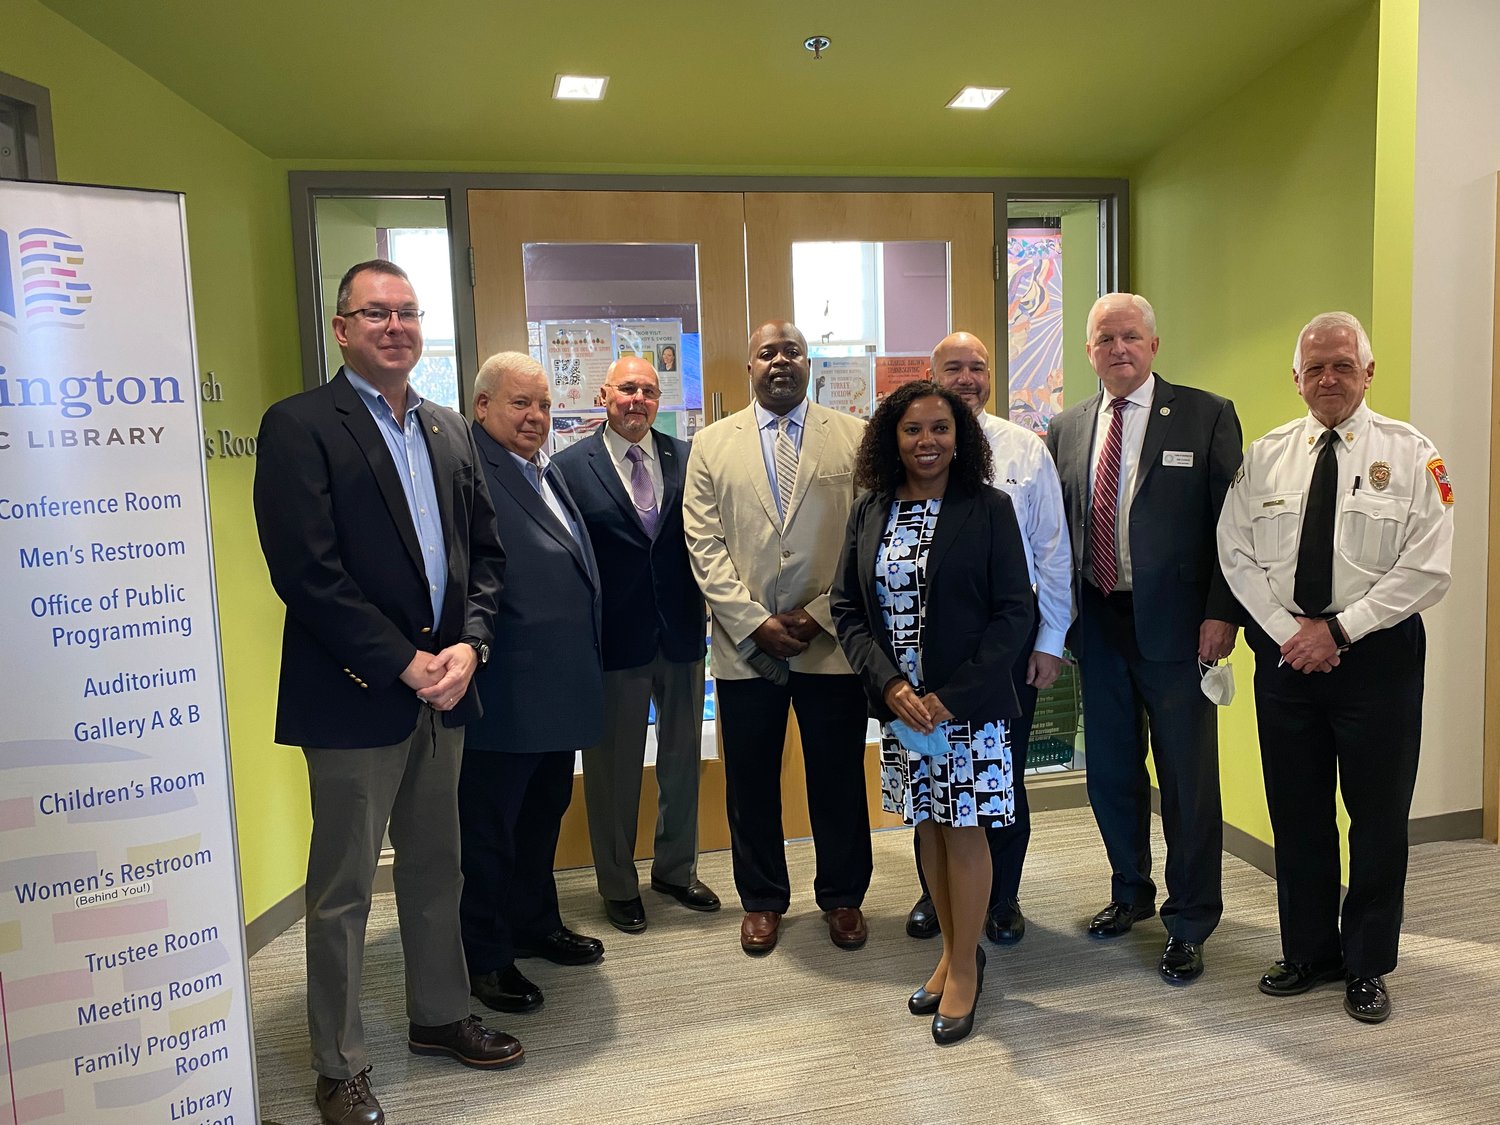 Pictured are (from left to right) Peter Gaynor, Norm Menard, Ray Laprad, Armand Randolph, Lieutenant Governor Sabina Matos, Bob Grimley, James Cunha, and Gerald Bessette.